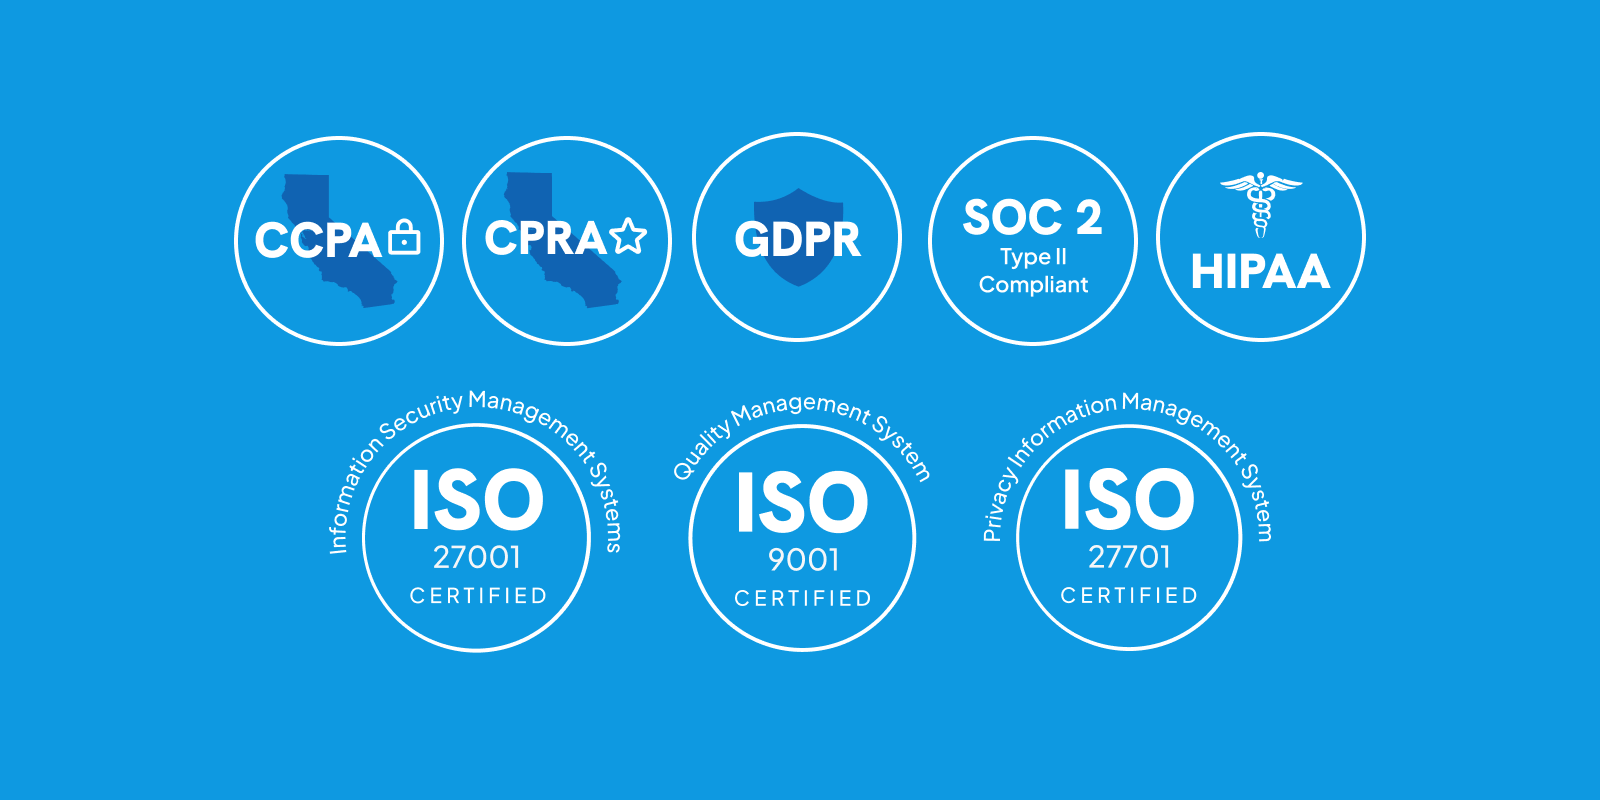 Certified SOC 2, GDPR, ISO 27001 Compliant, and CCPA